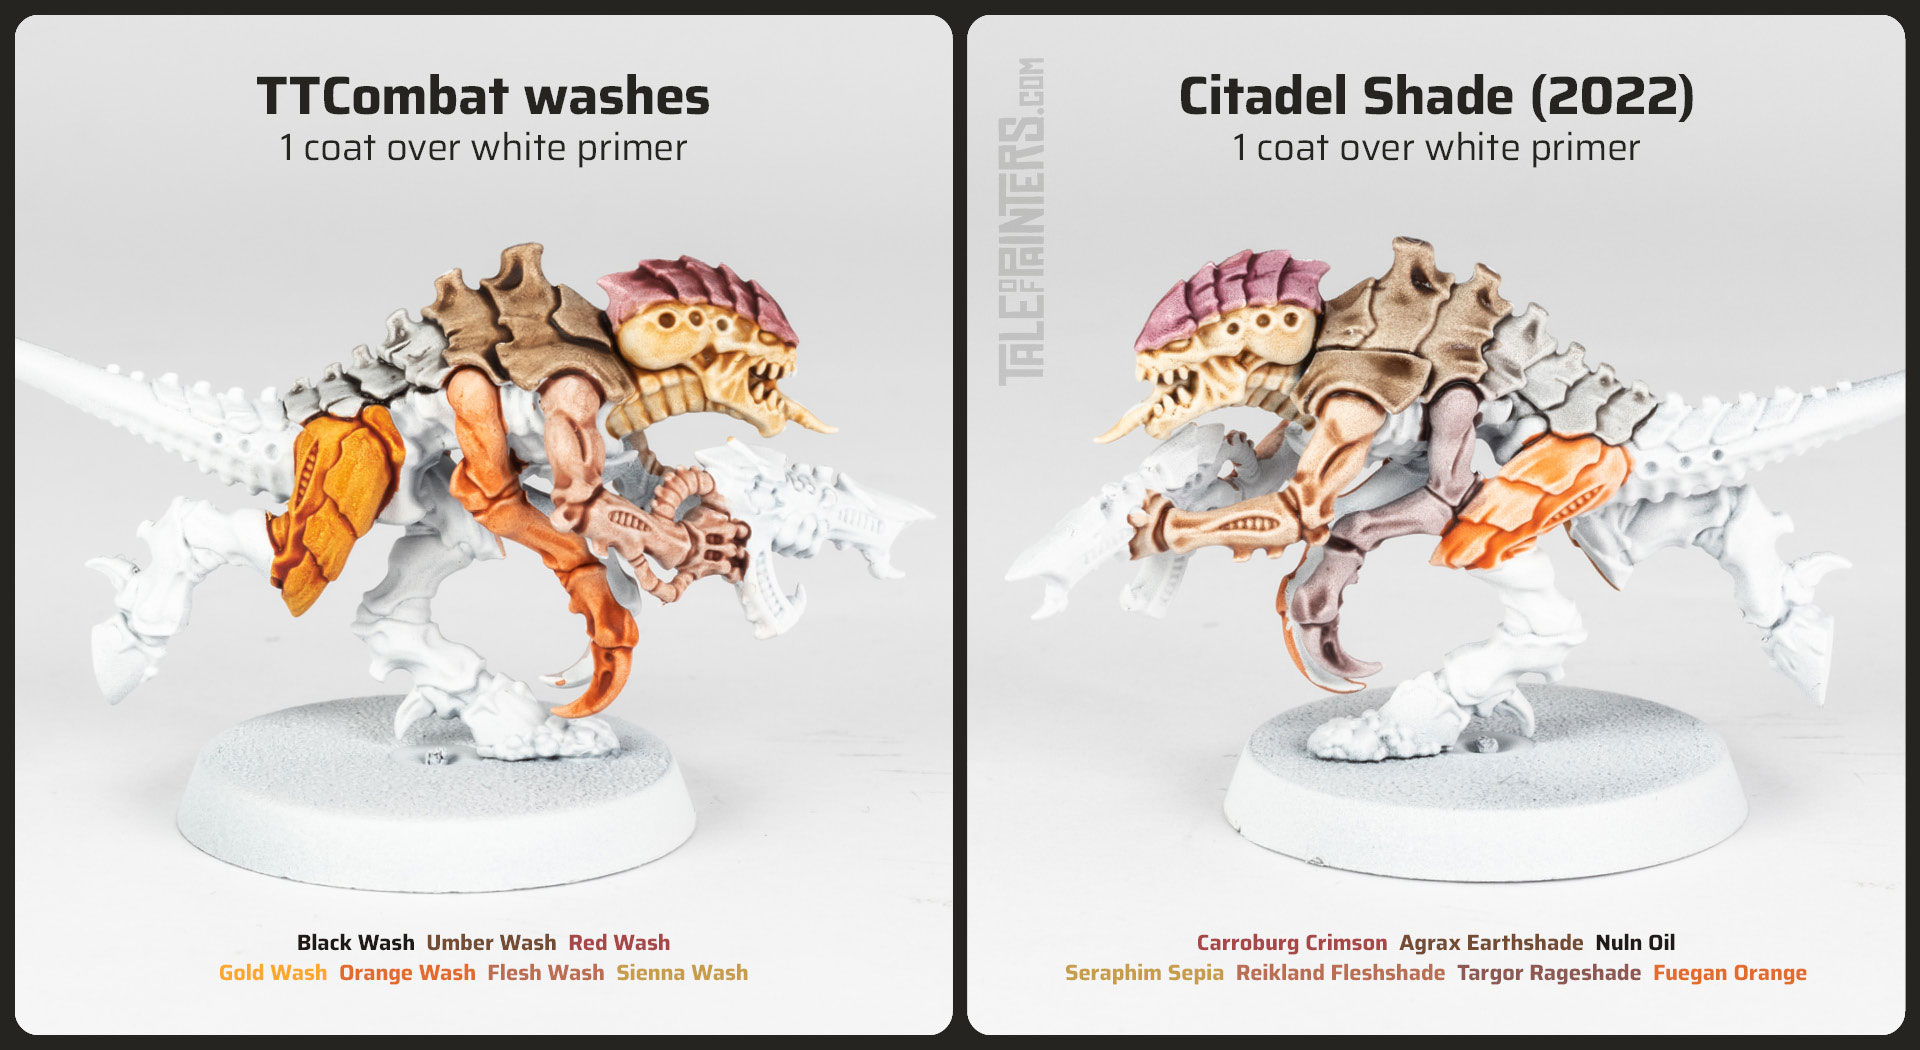 TTCombat washes compared with Citadel Shade paints